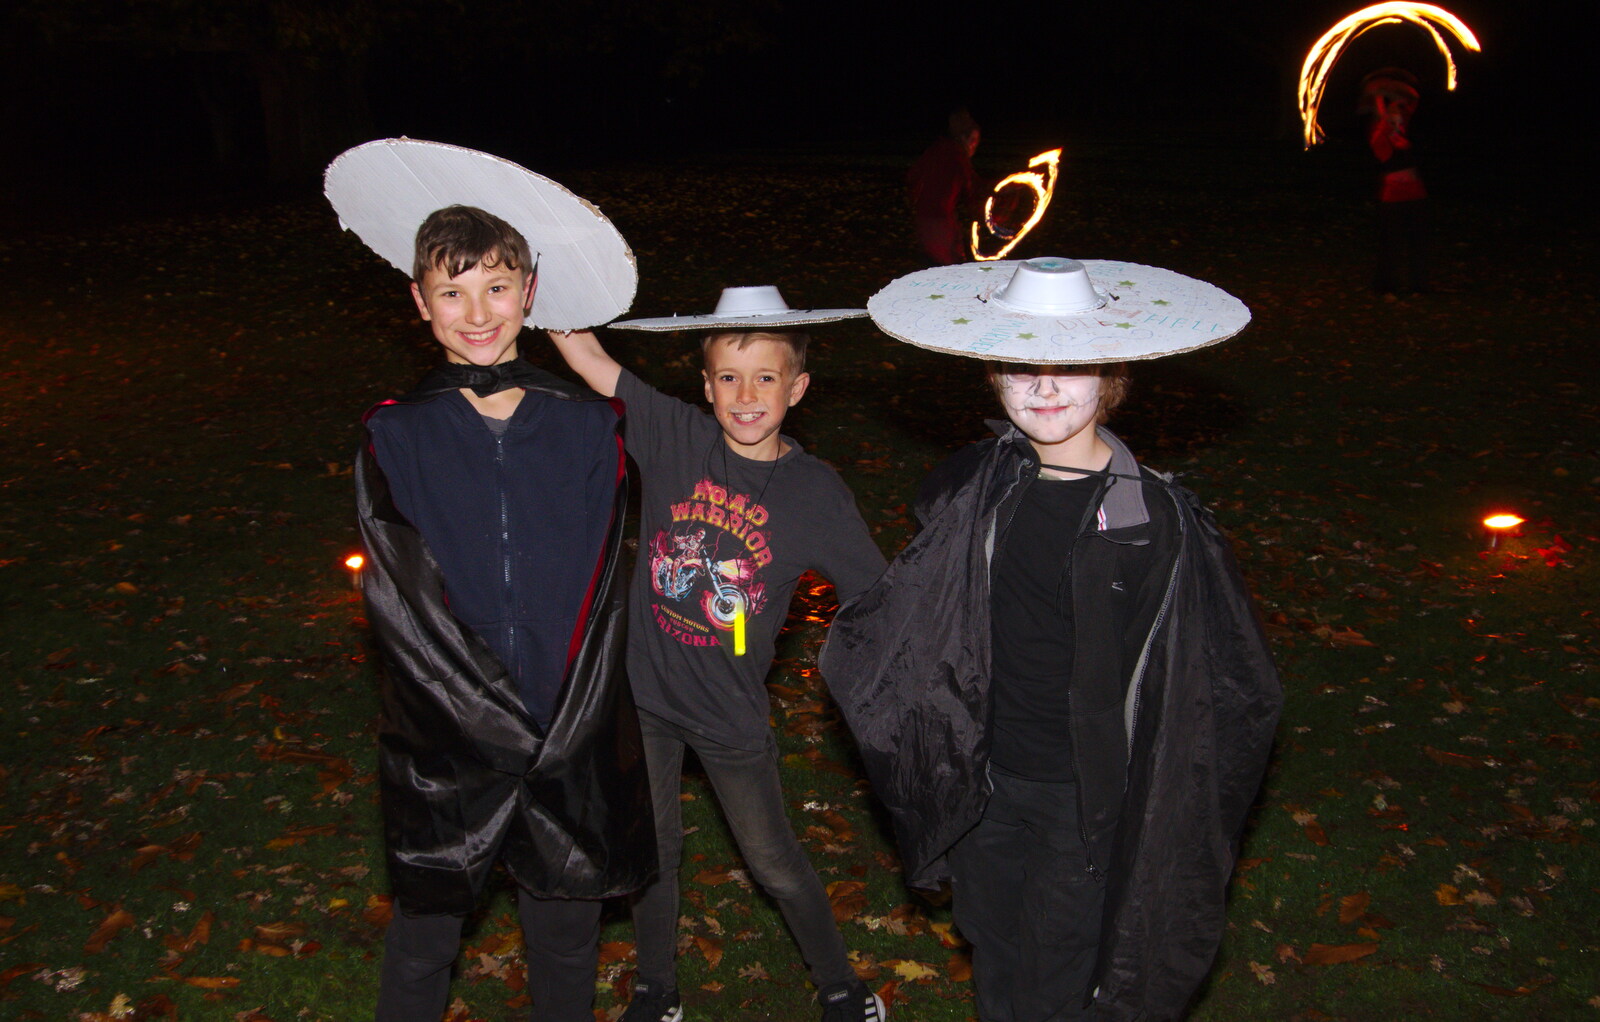 The three amigos from Day of the Dead Party at the Oaksmere, Brome, Suffolk - 2nd November 2019